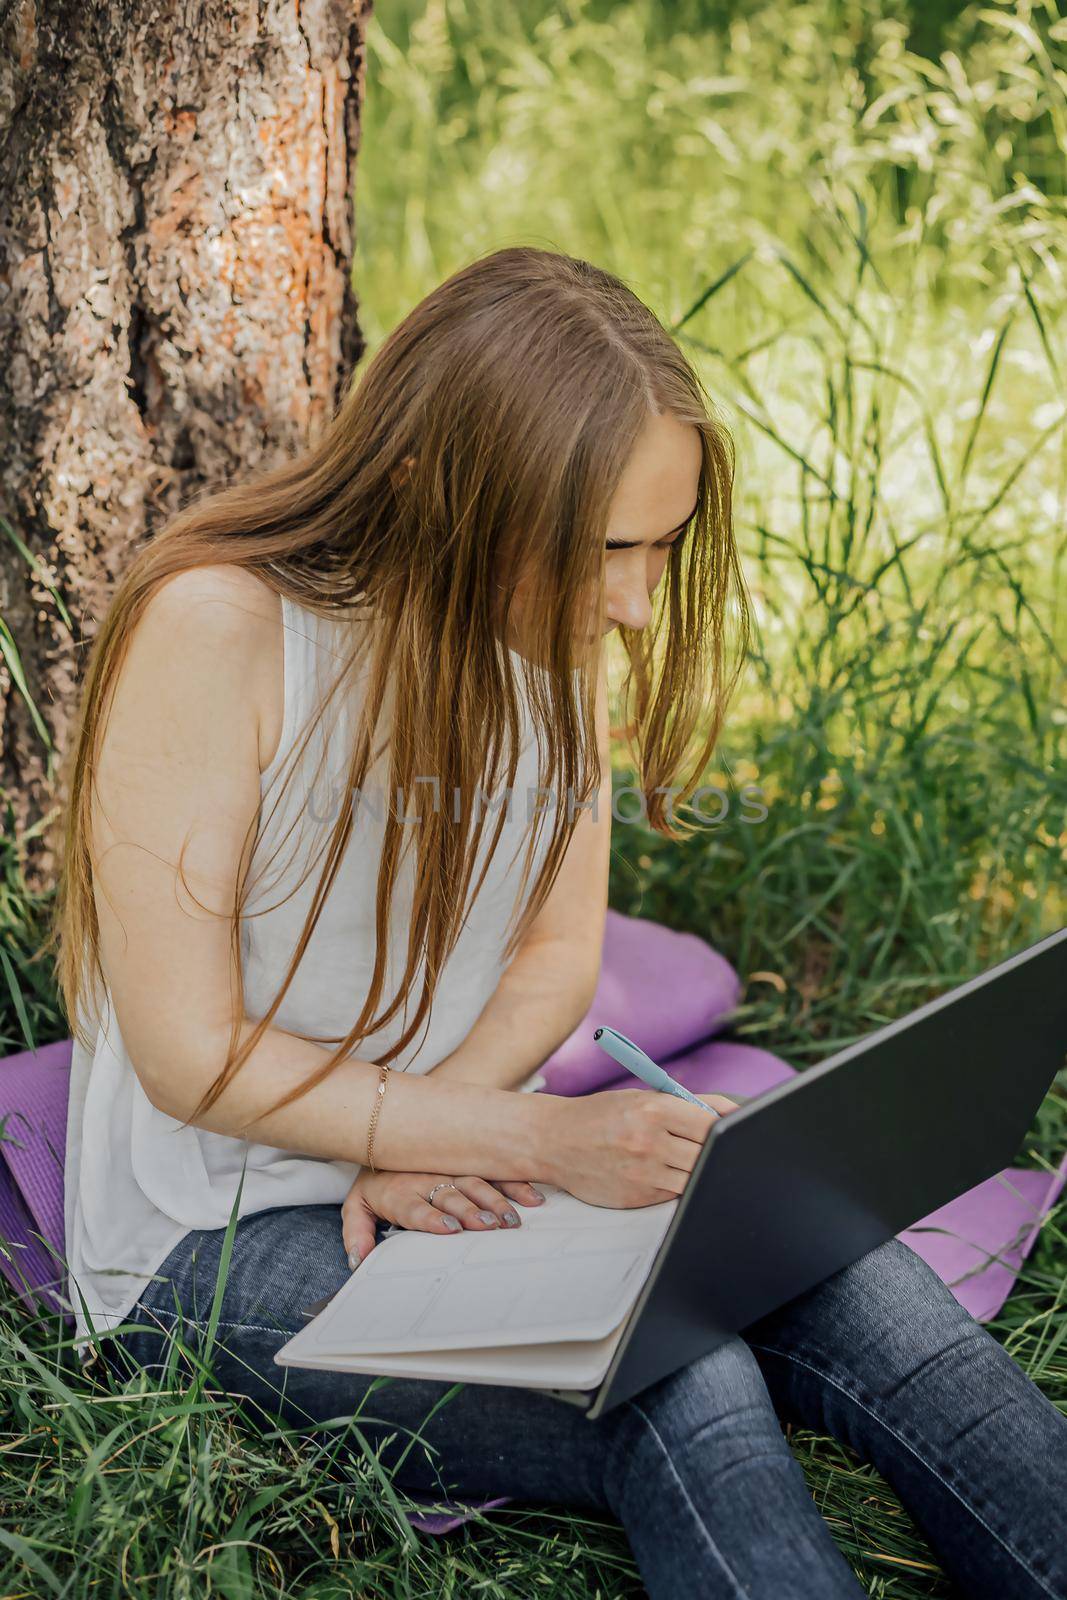 the girl sits on the grass and uses a laptop. Education, lifestyle, technology concept, outdoor learning concept by Anyatachka